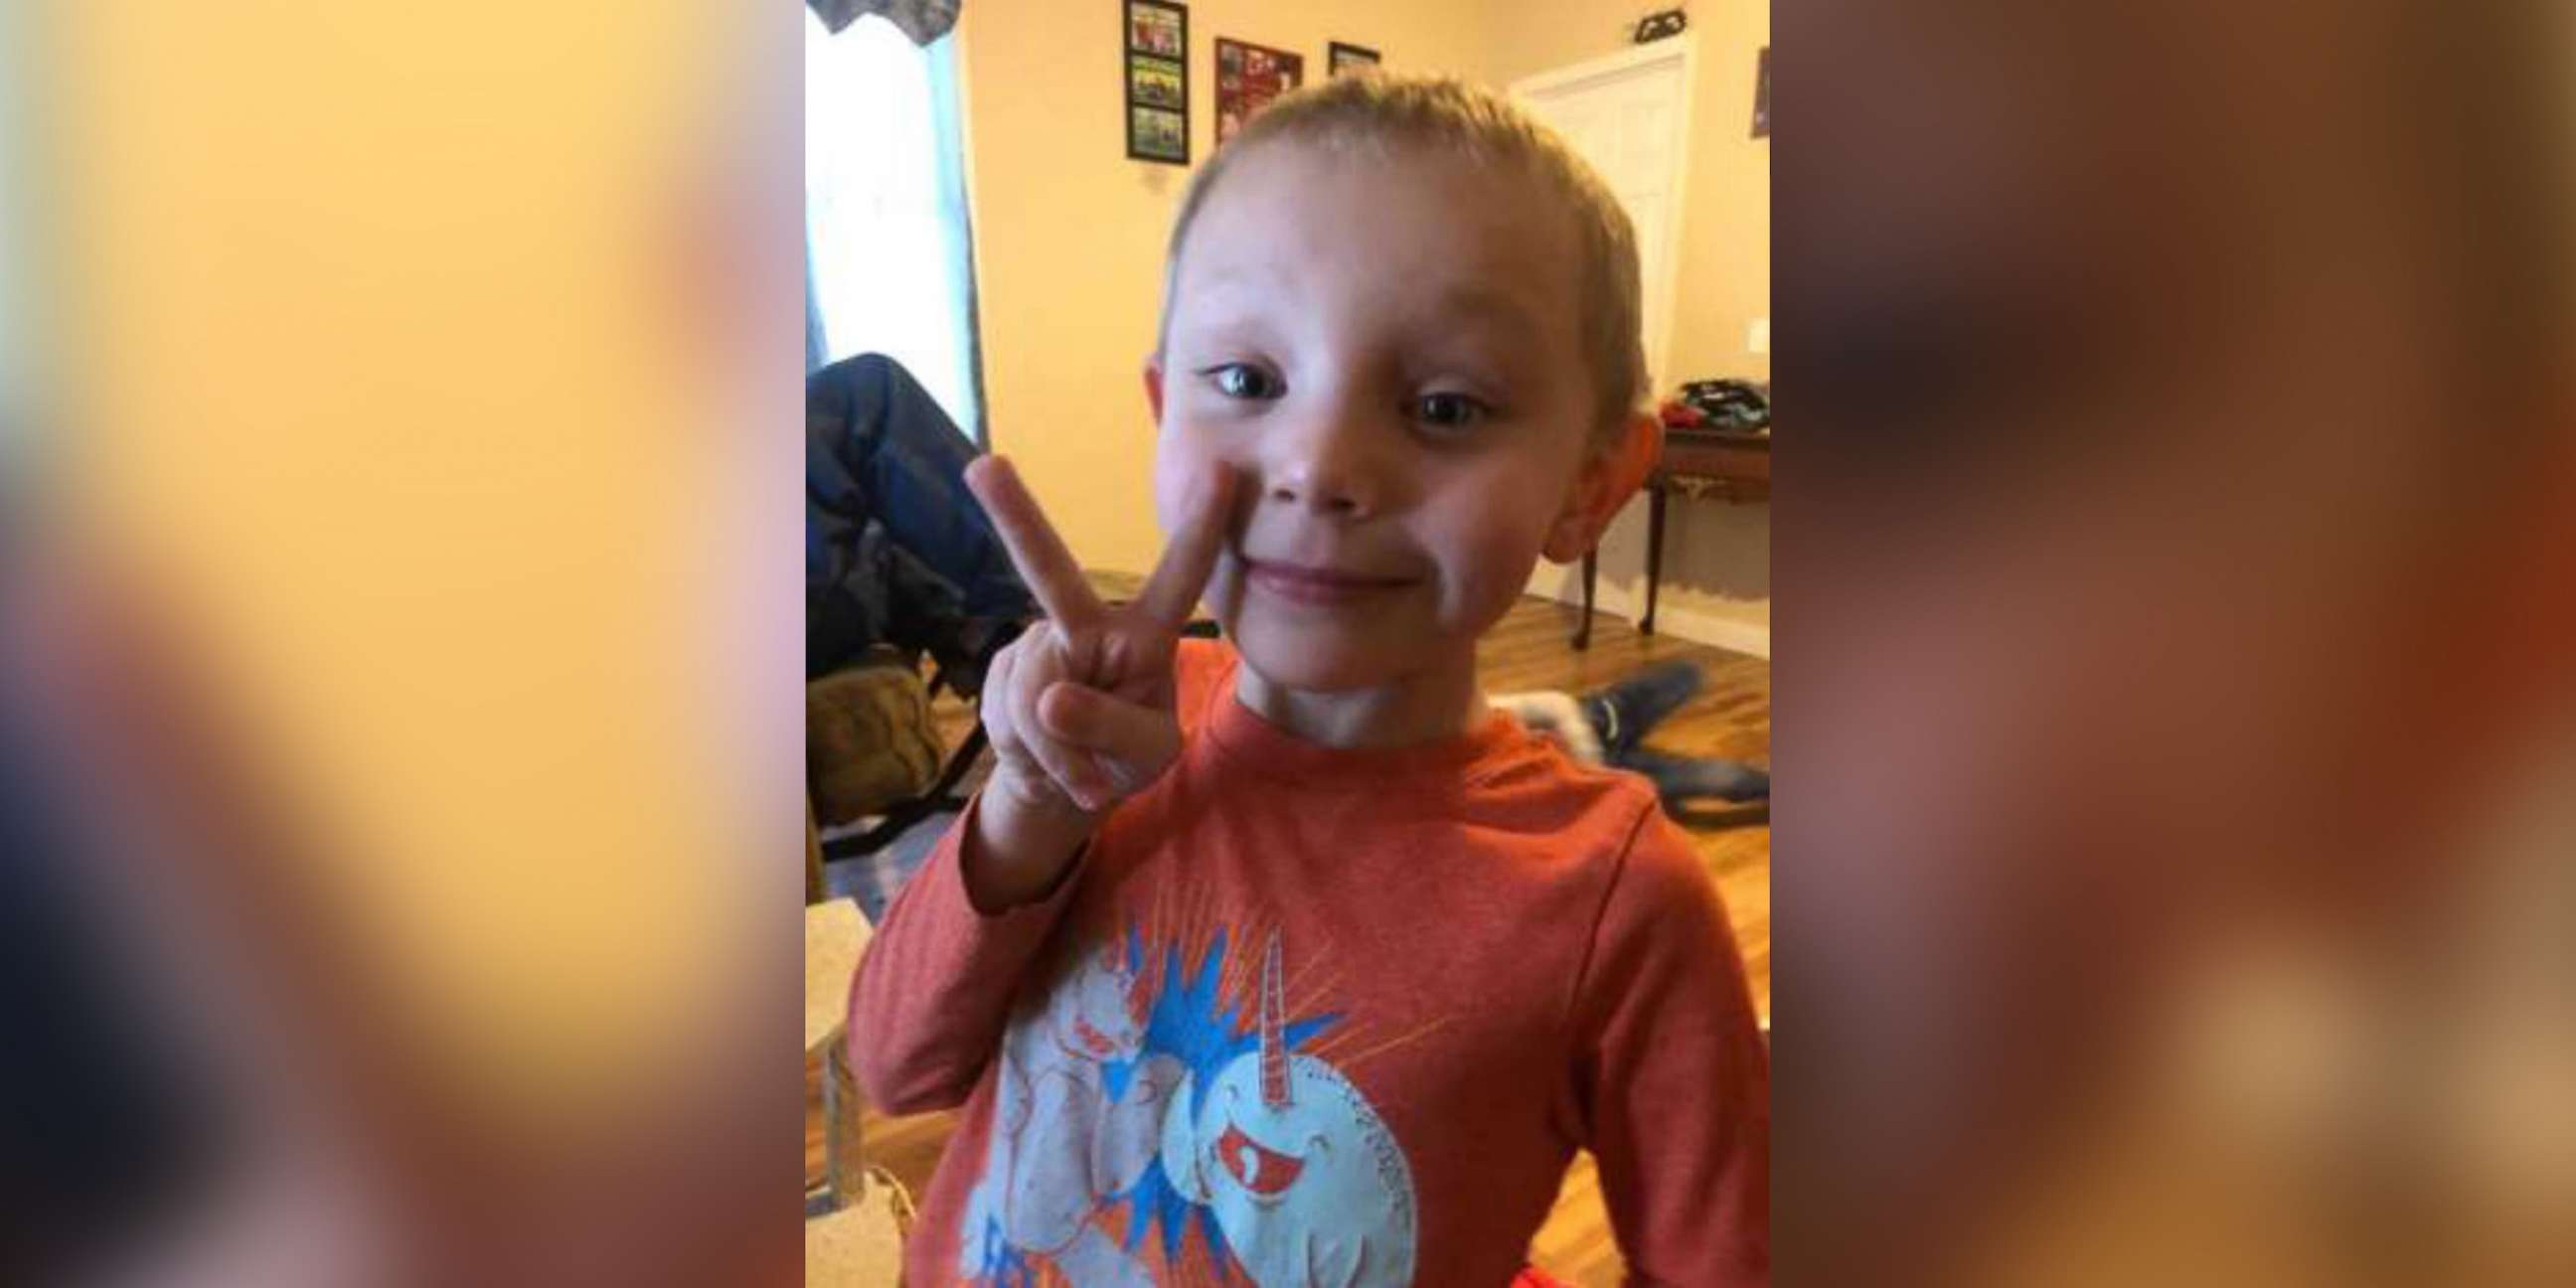 PHOTO: An undated photo shows Beau Brennan Belson, 5, who has been missing from Six Lakes, Mich., since the afternoon of Dec. 25, 2019.